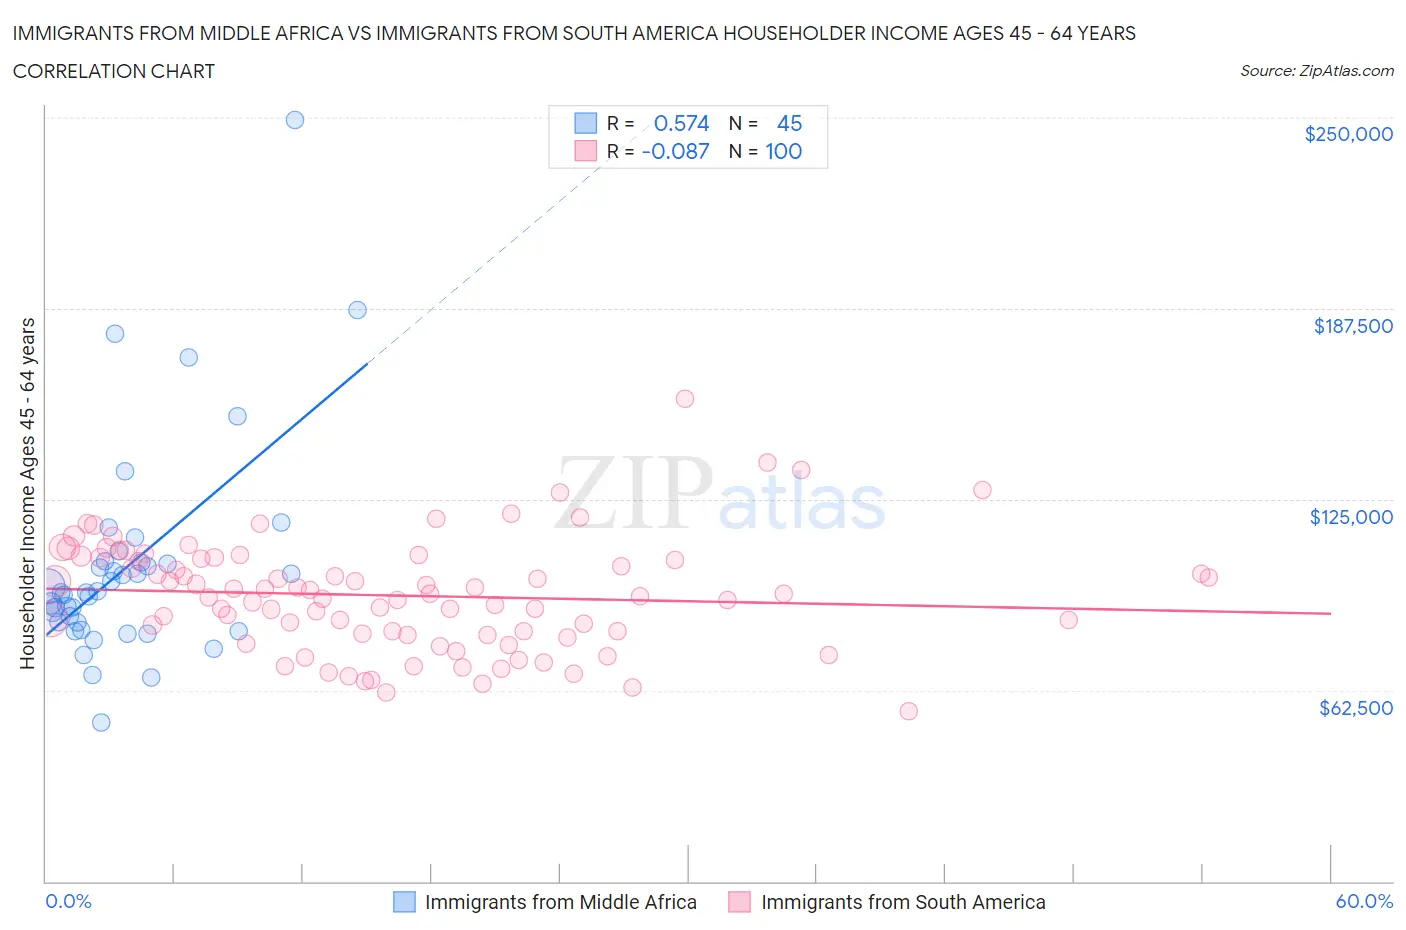 Immigrants from Middle Africa vs Immigrants from South America Householder Income Ages 45 - 64 years